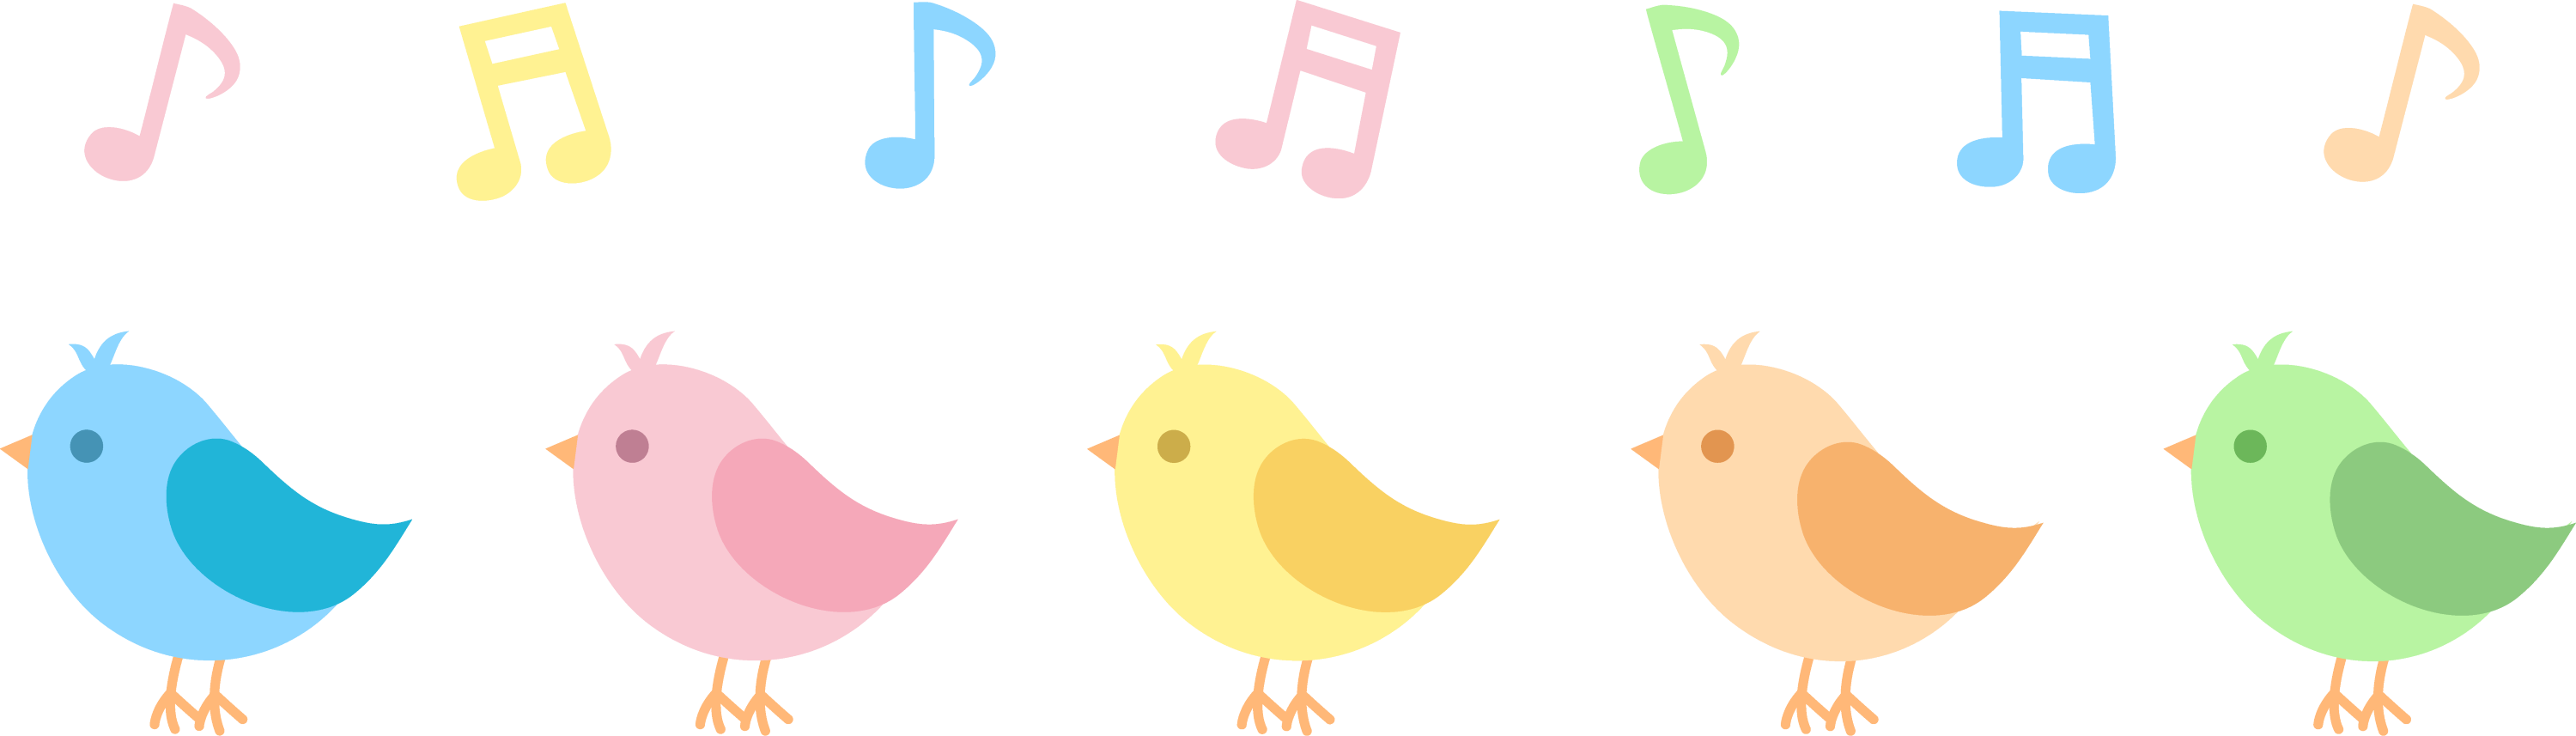 http://sweetclipart.com/multisite/sweetclipart/files/song_birds_singing.png